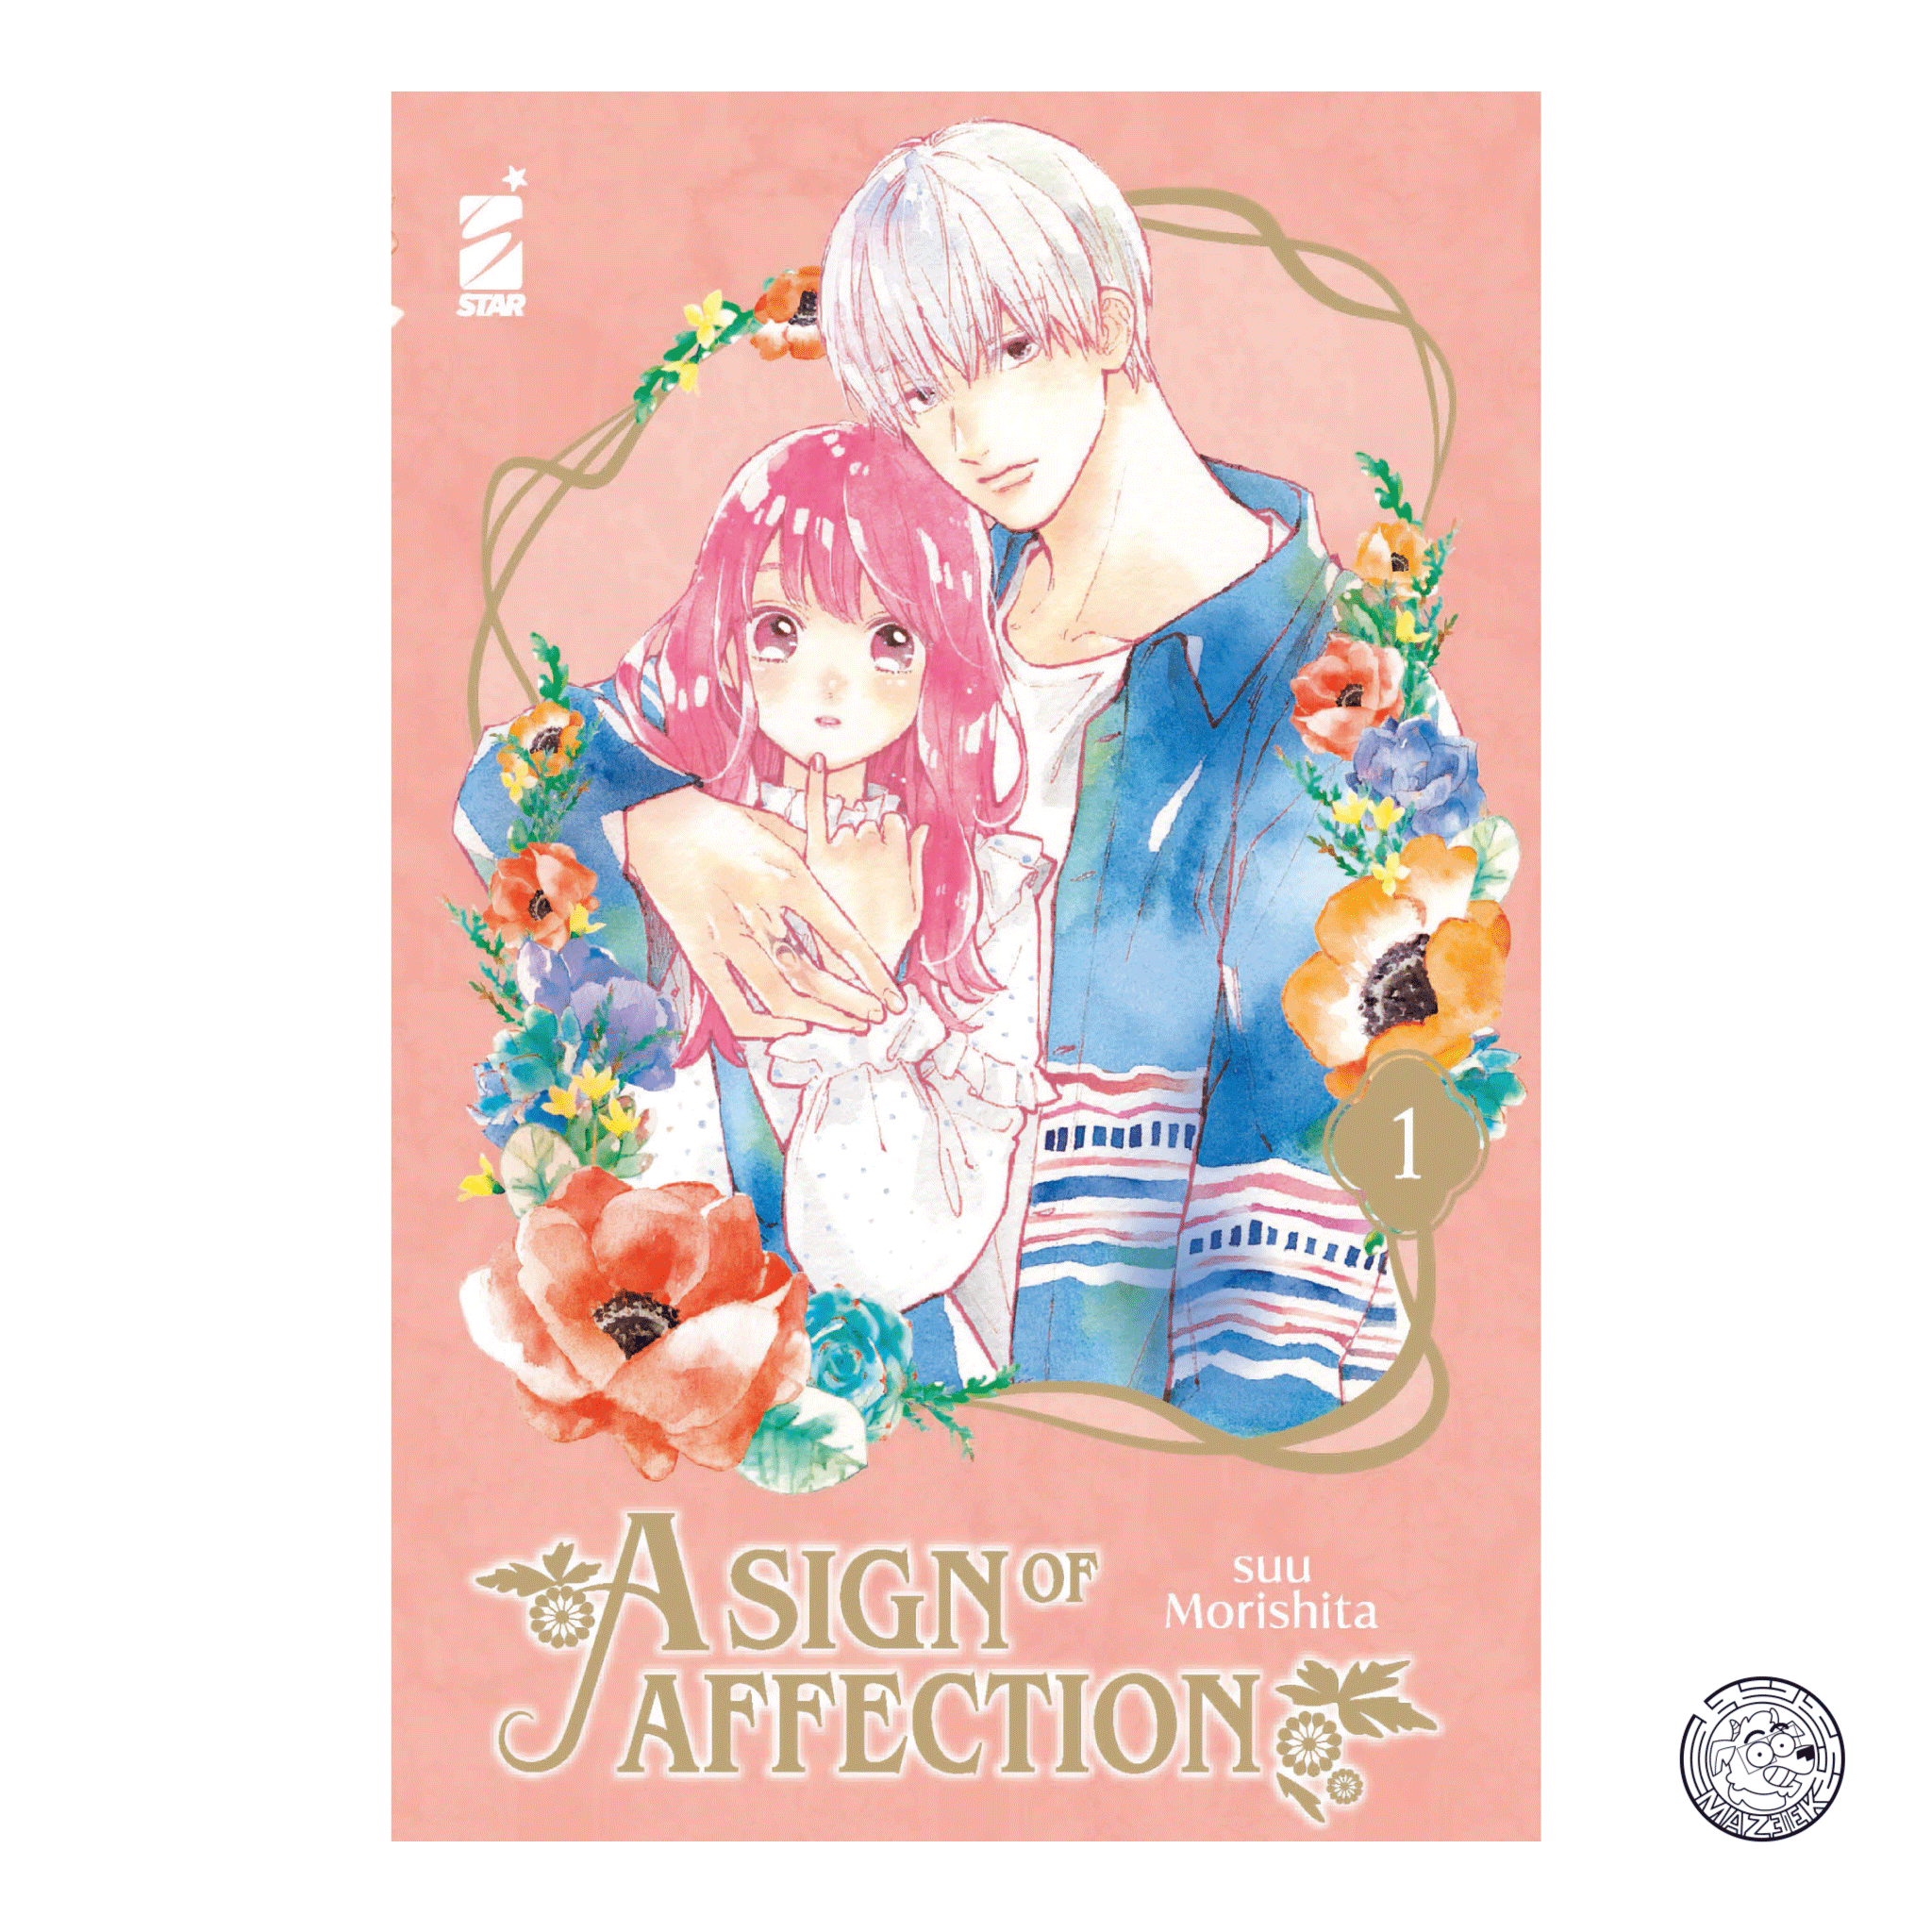 A Sign of Affection 01